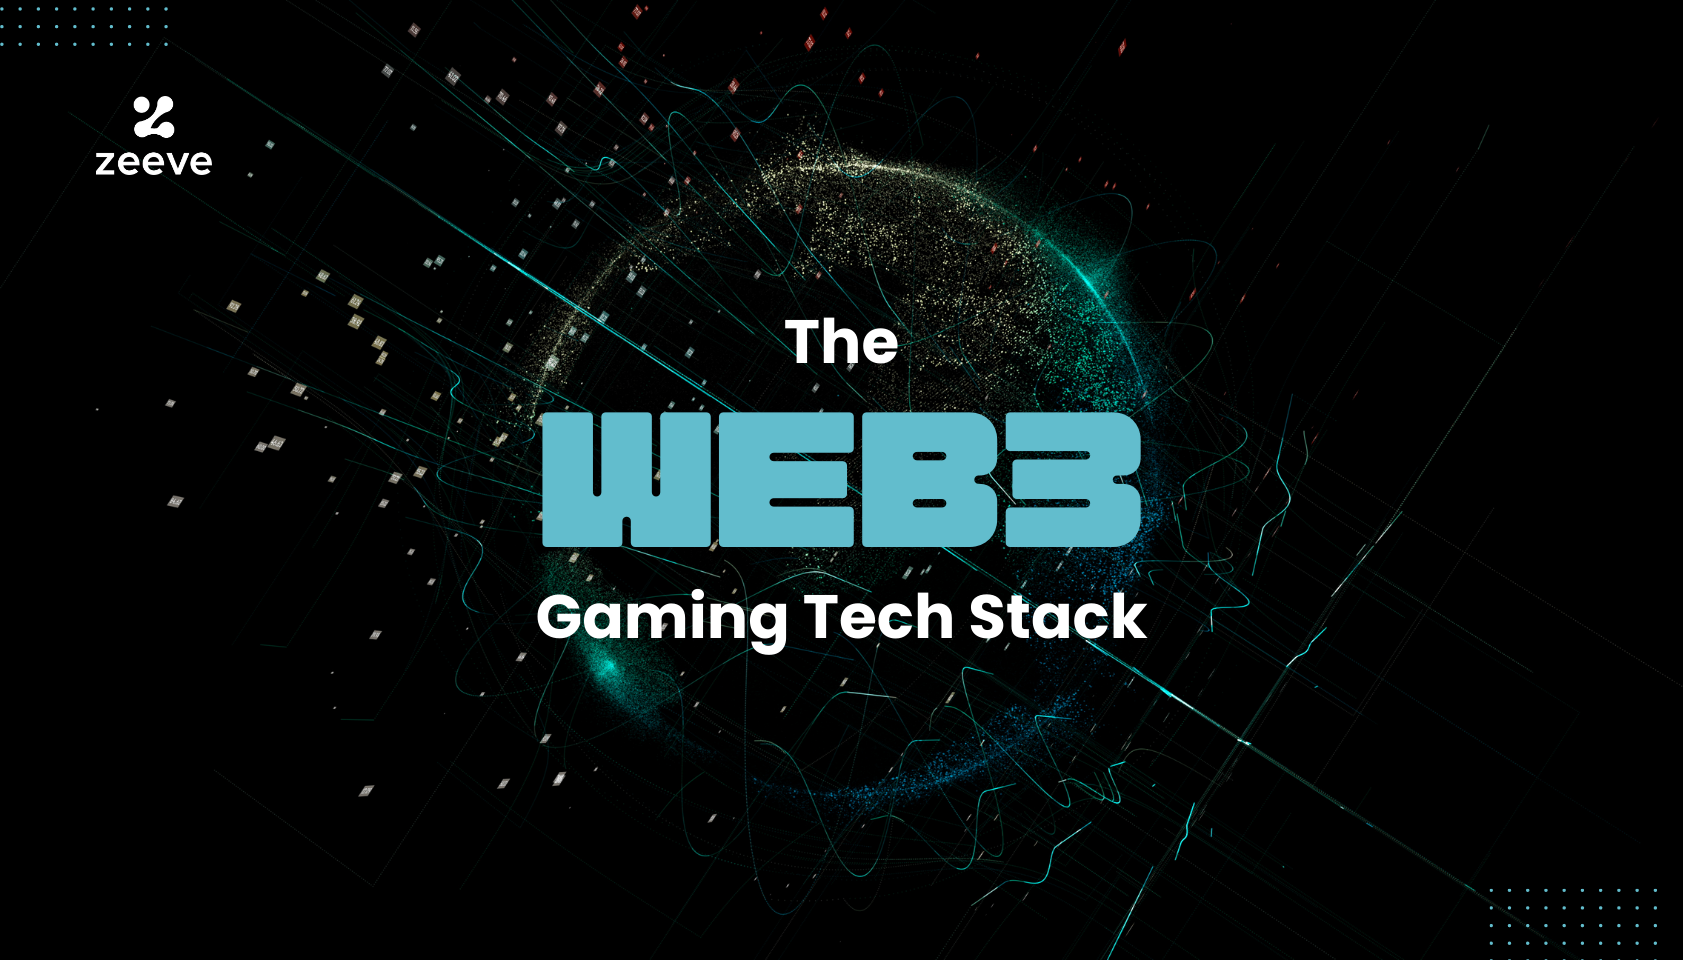 Top Game Companies Have Set Their Sights on Web3